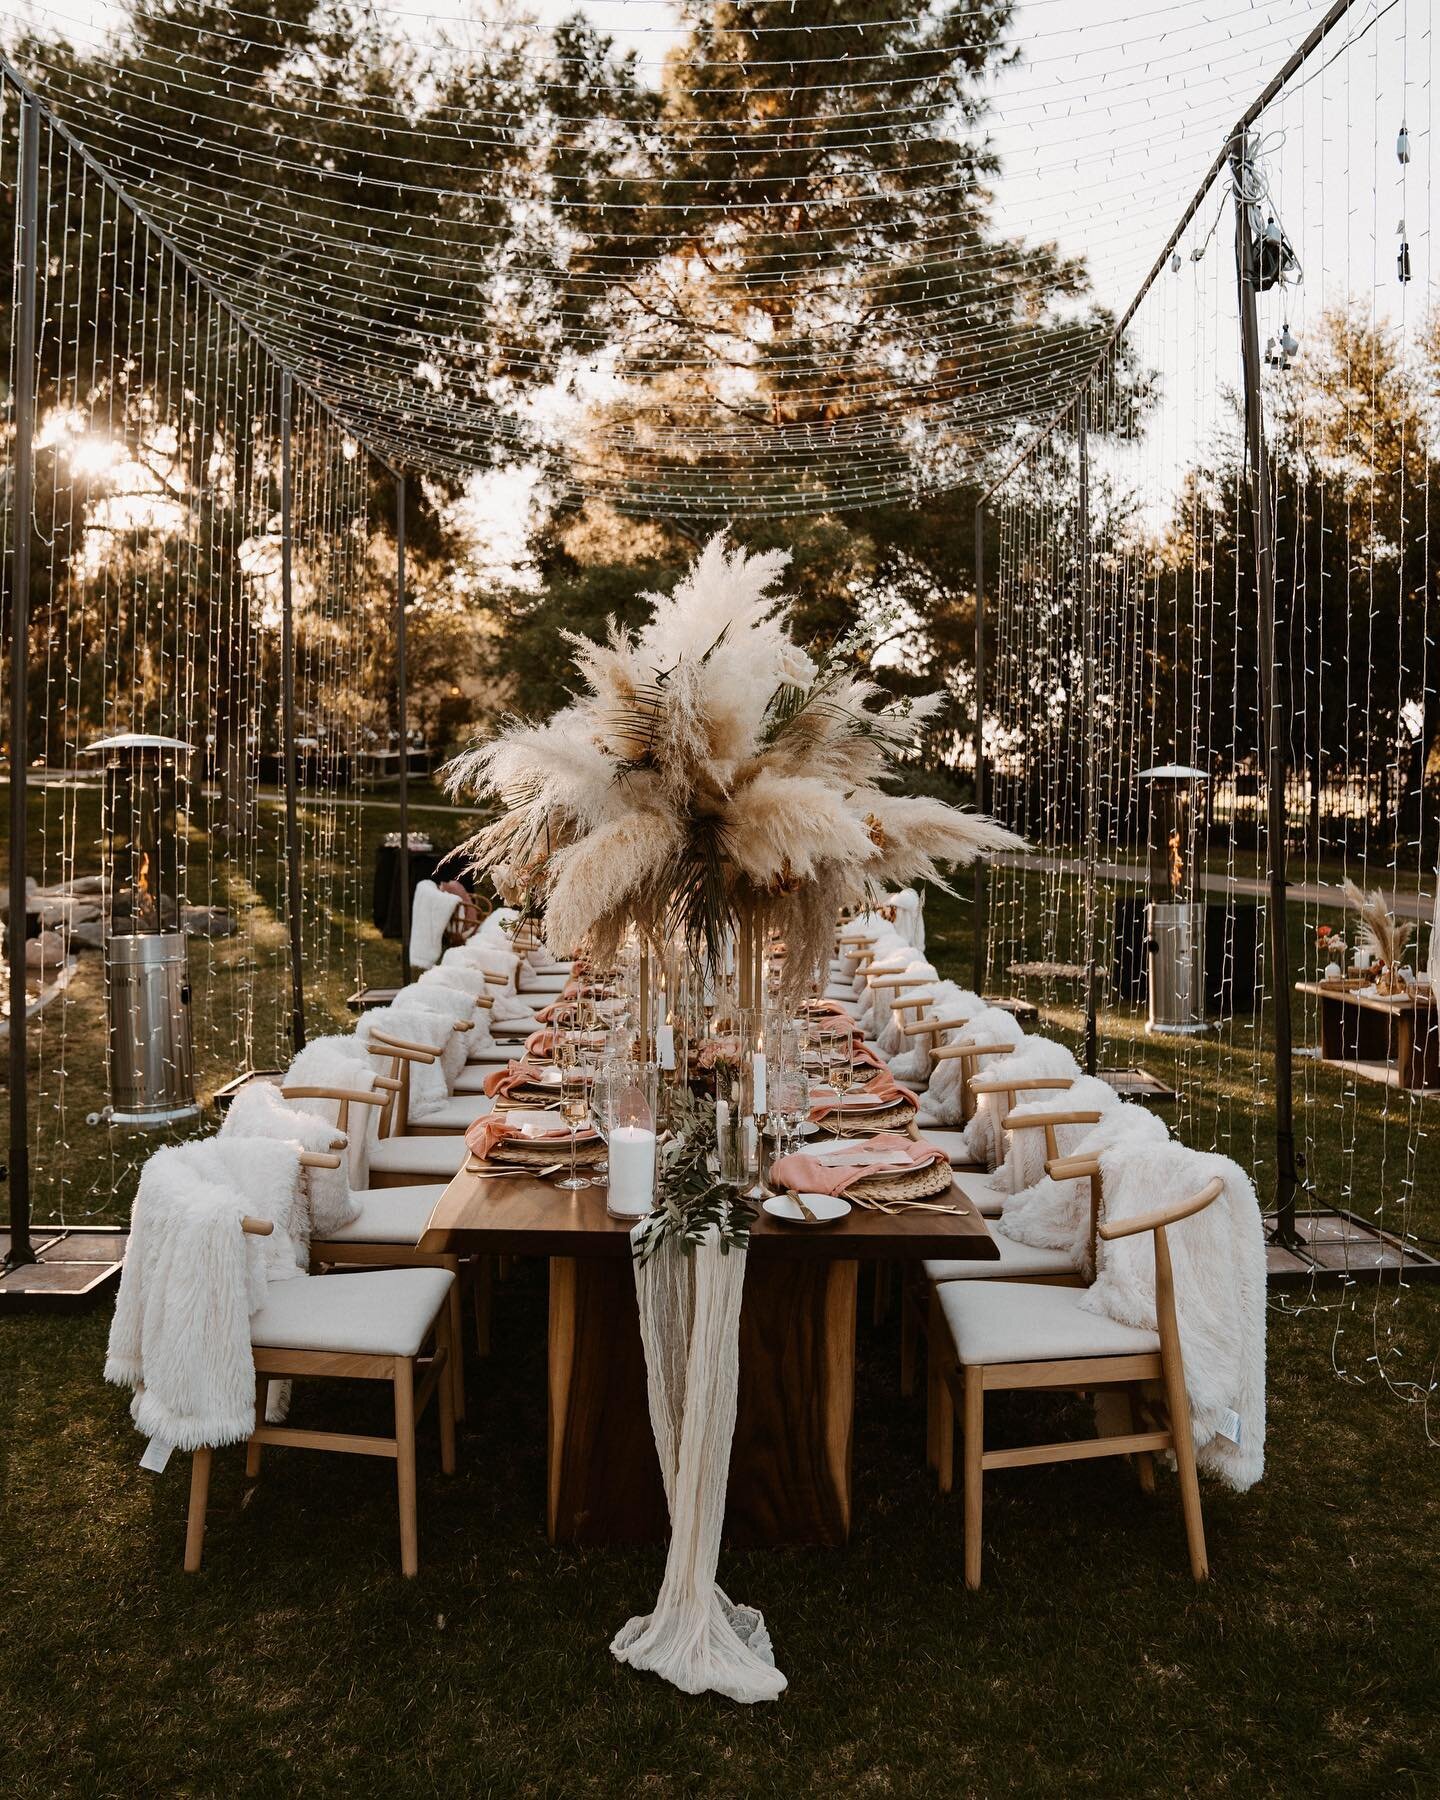 The coziest petite event you&rsquo;ll see all day! 

Live Edge Tables
Linen Wishbone Chair
Honey Cocktail Table
Heaters